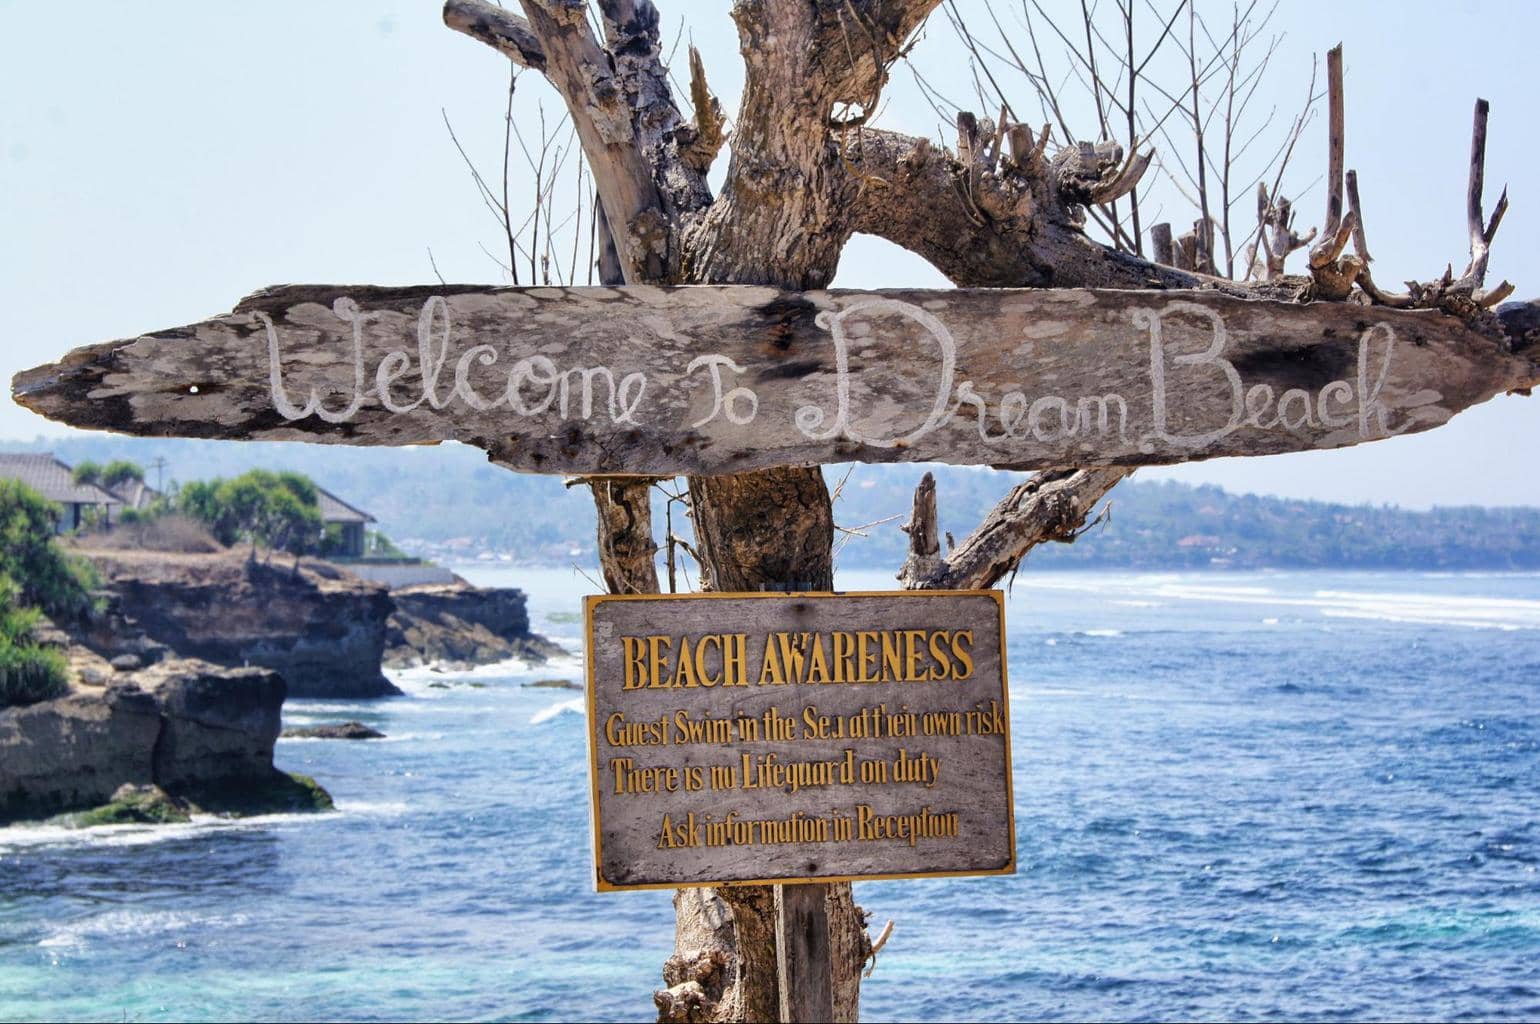 Dream Beach, one of the most famous beaches in Nusa Lembongan, Bali